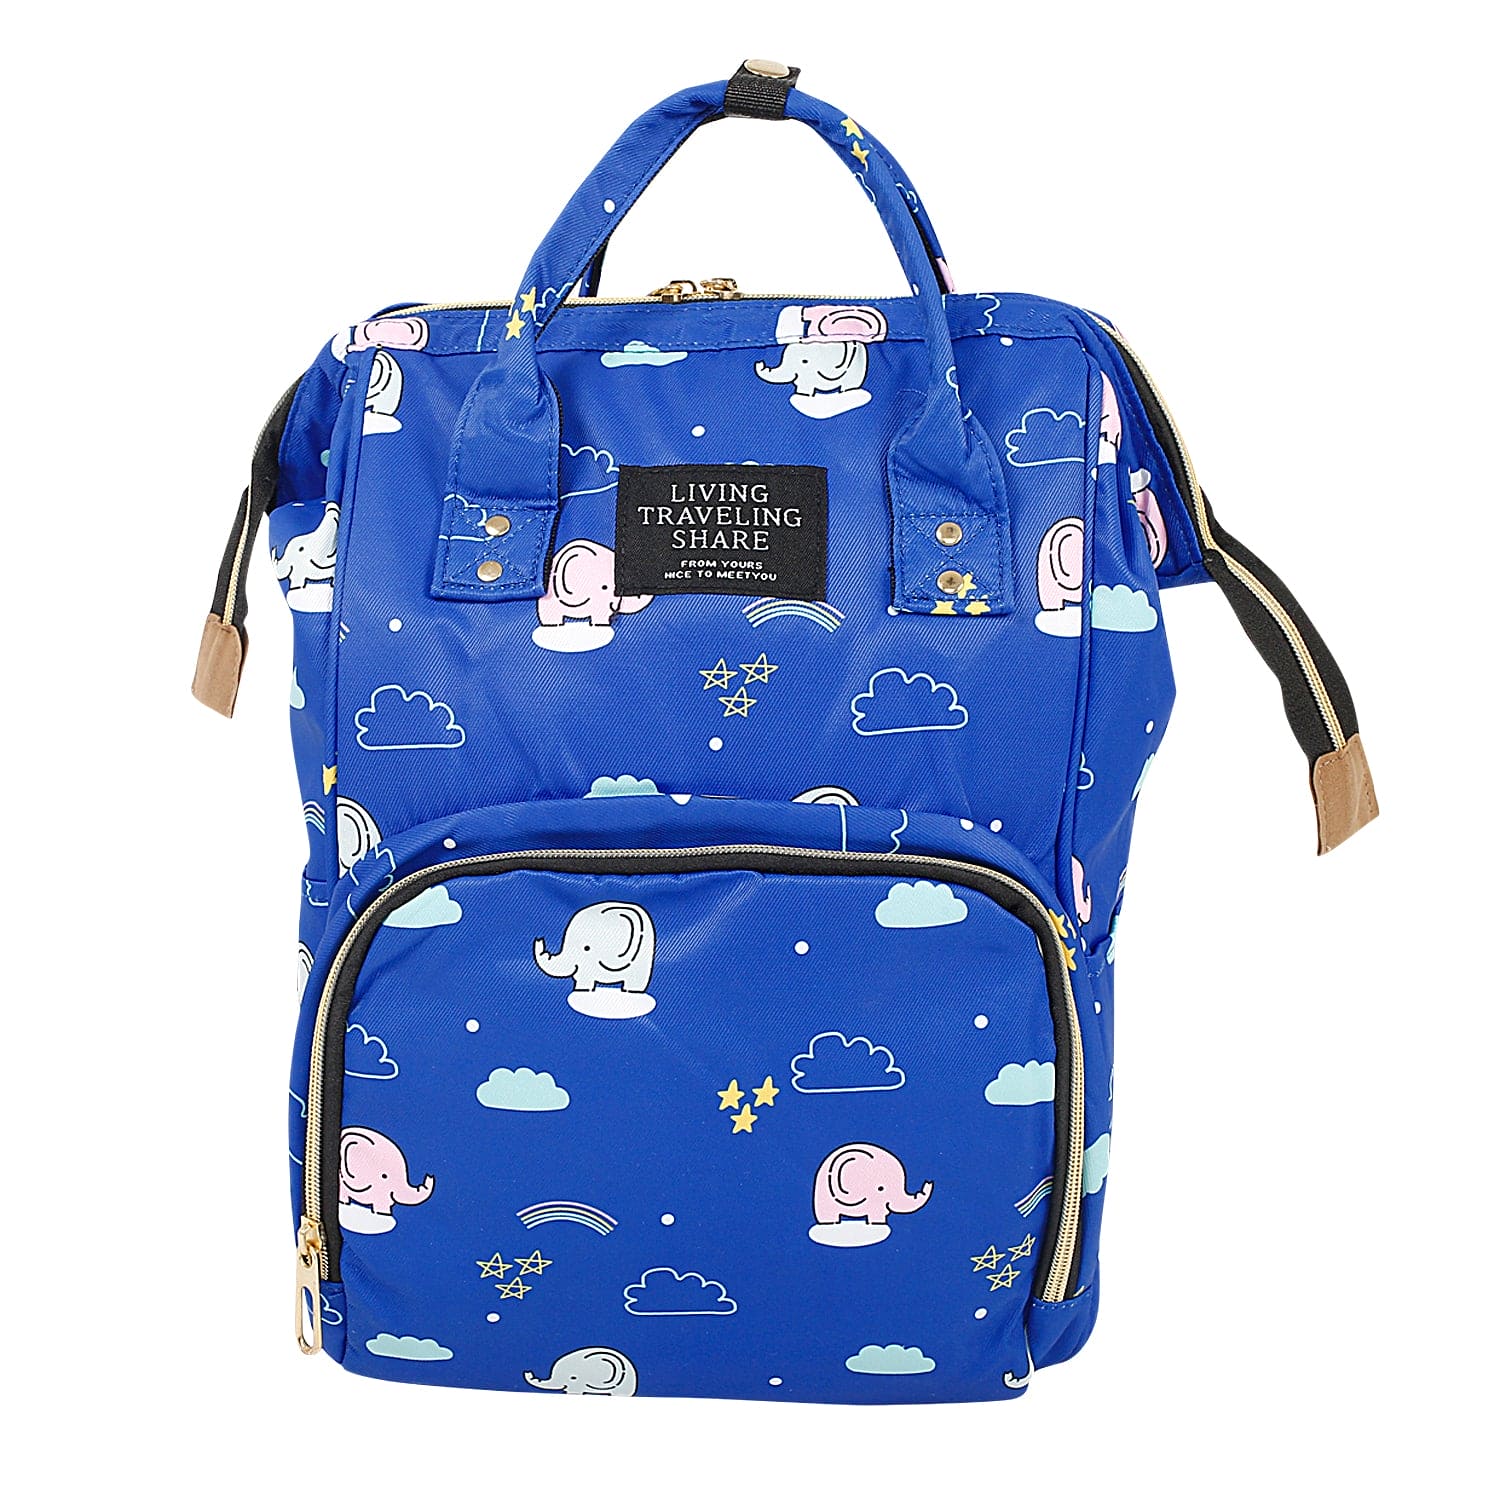 Buy The Mom Store Limited Edition Diaper Bag - Pastel Blue Online at Best  Price | Mothercare India